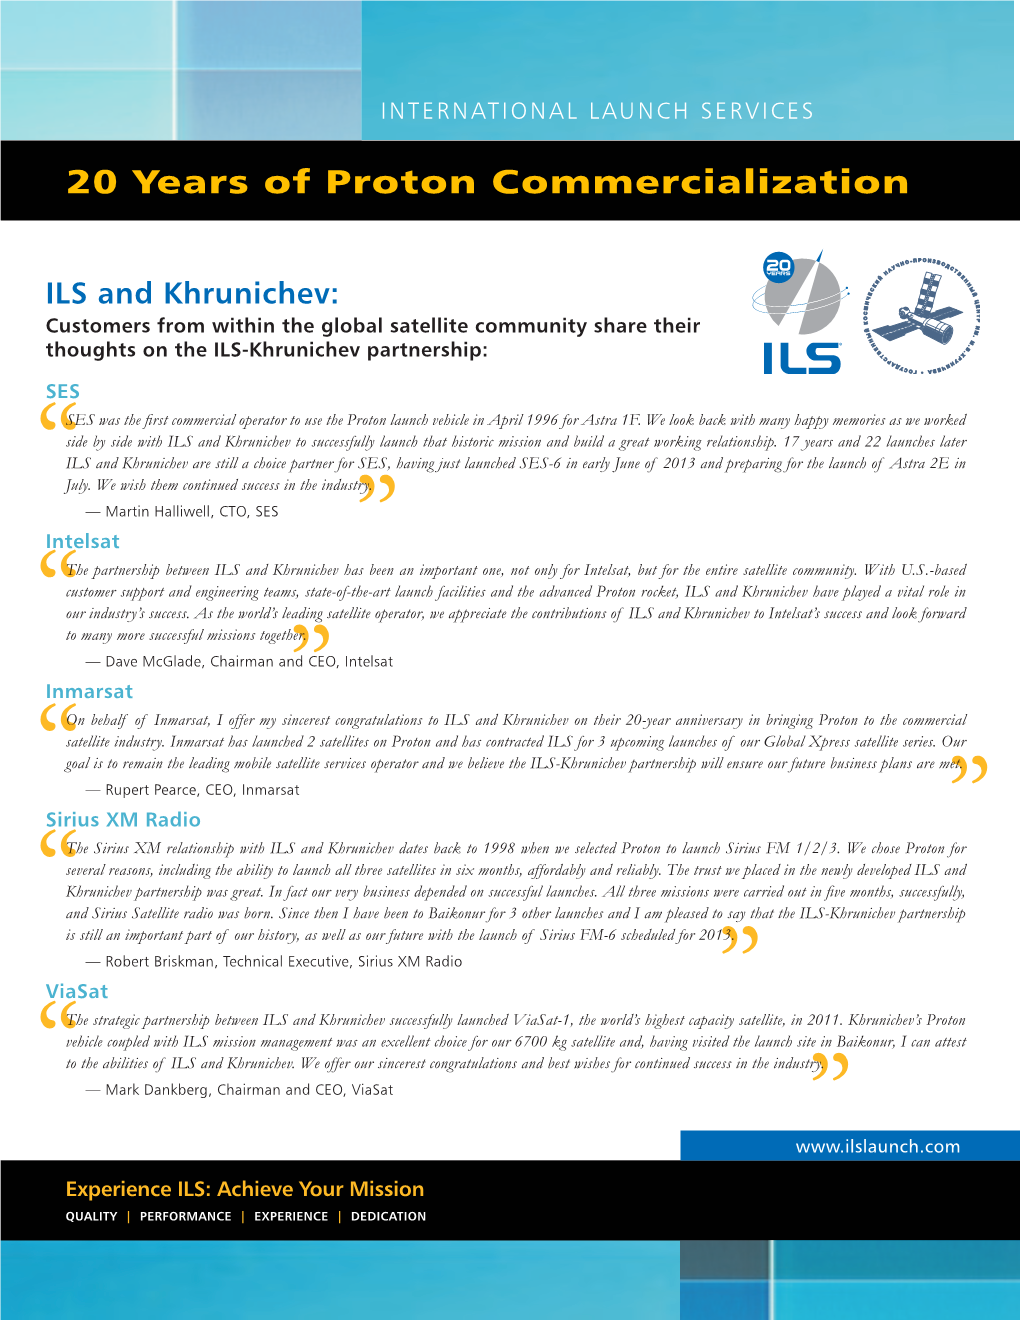 20 Years of Proton Commercialization